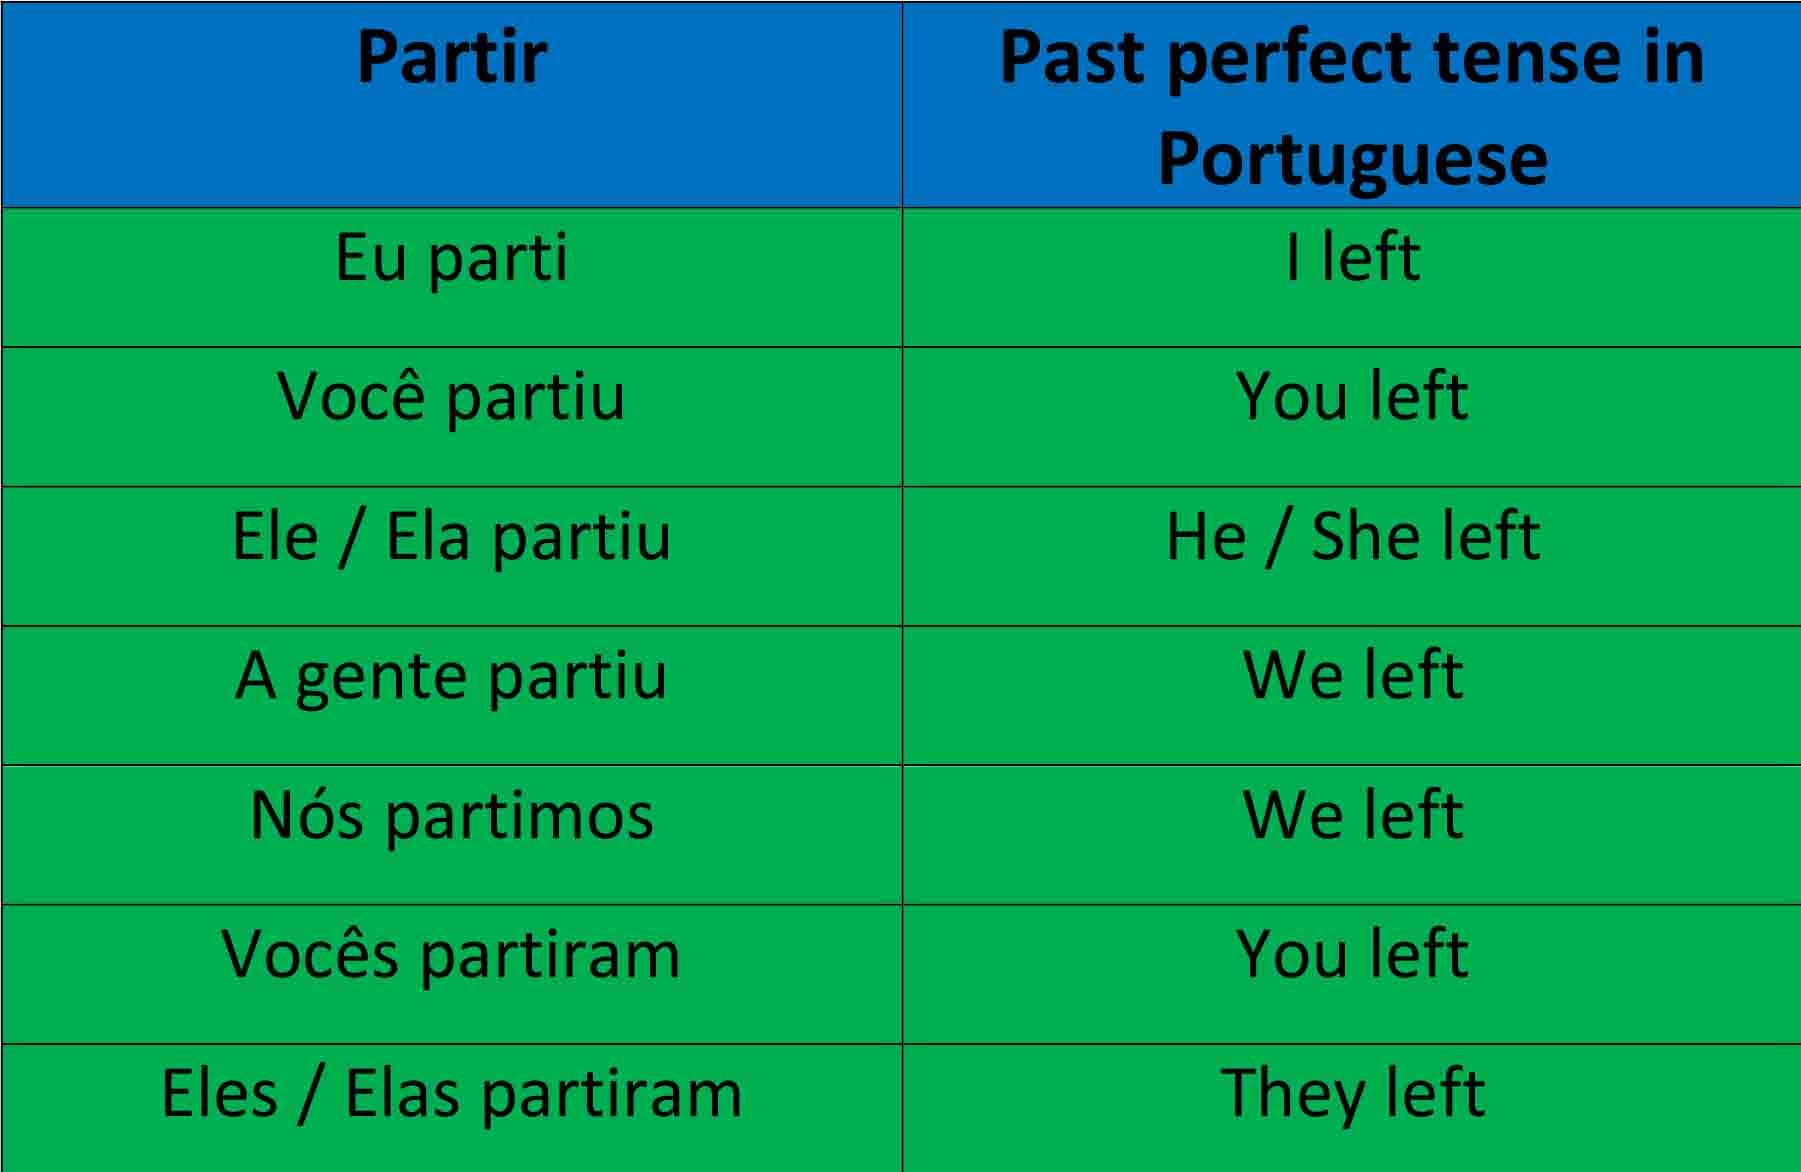 Image combining the verb partir in Portuguese past perfect tense